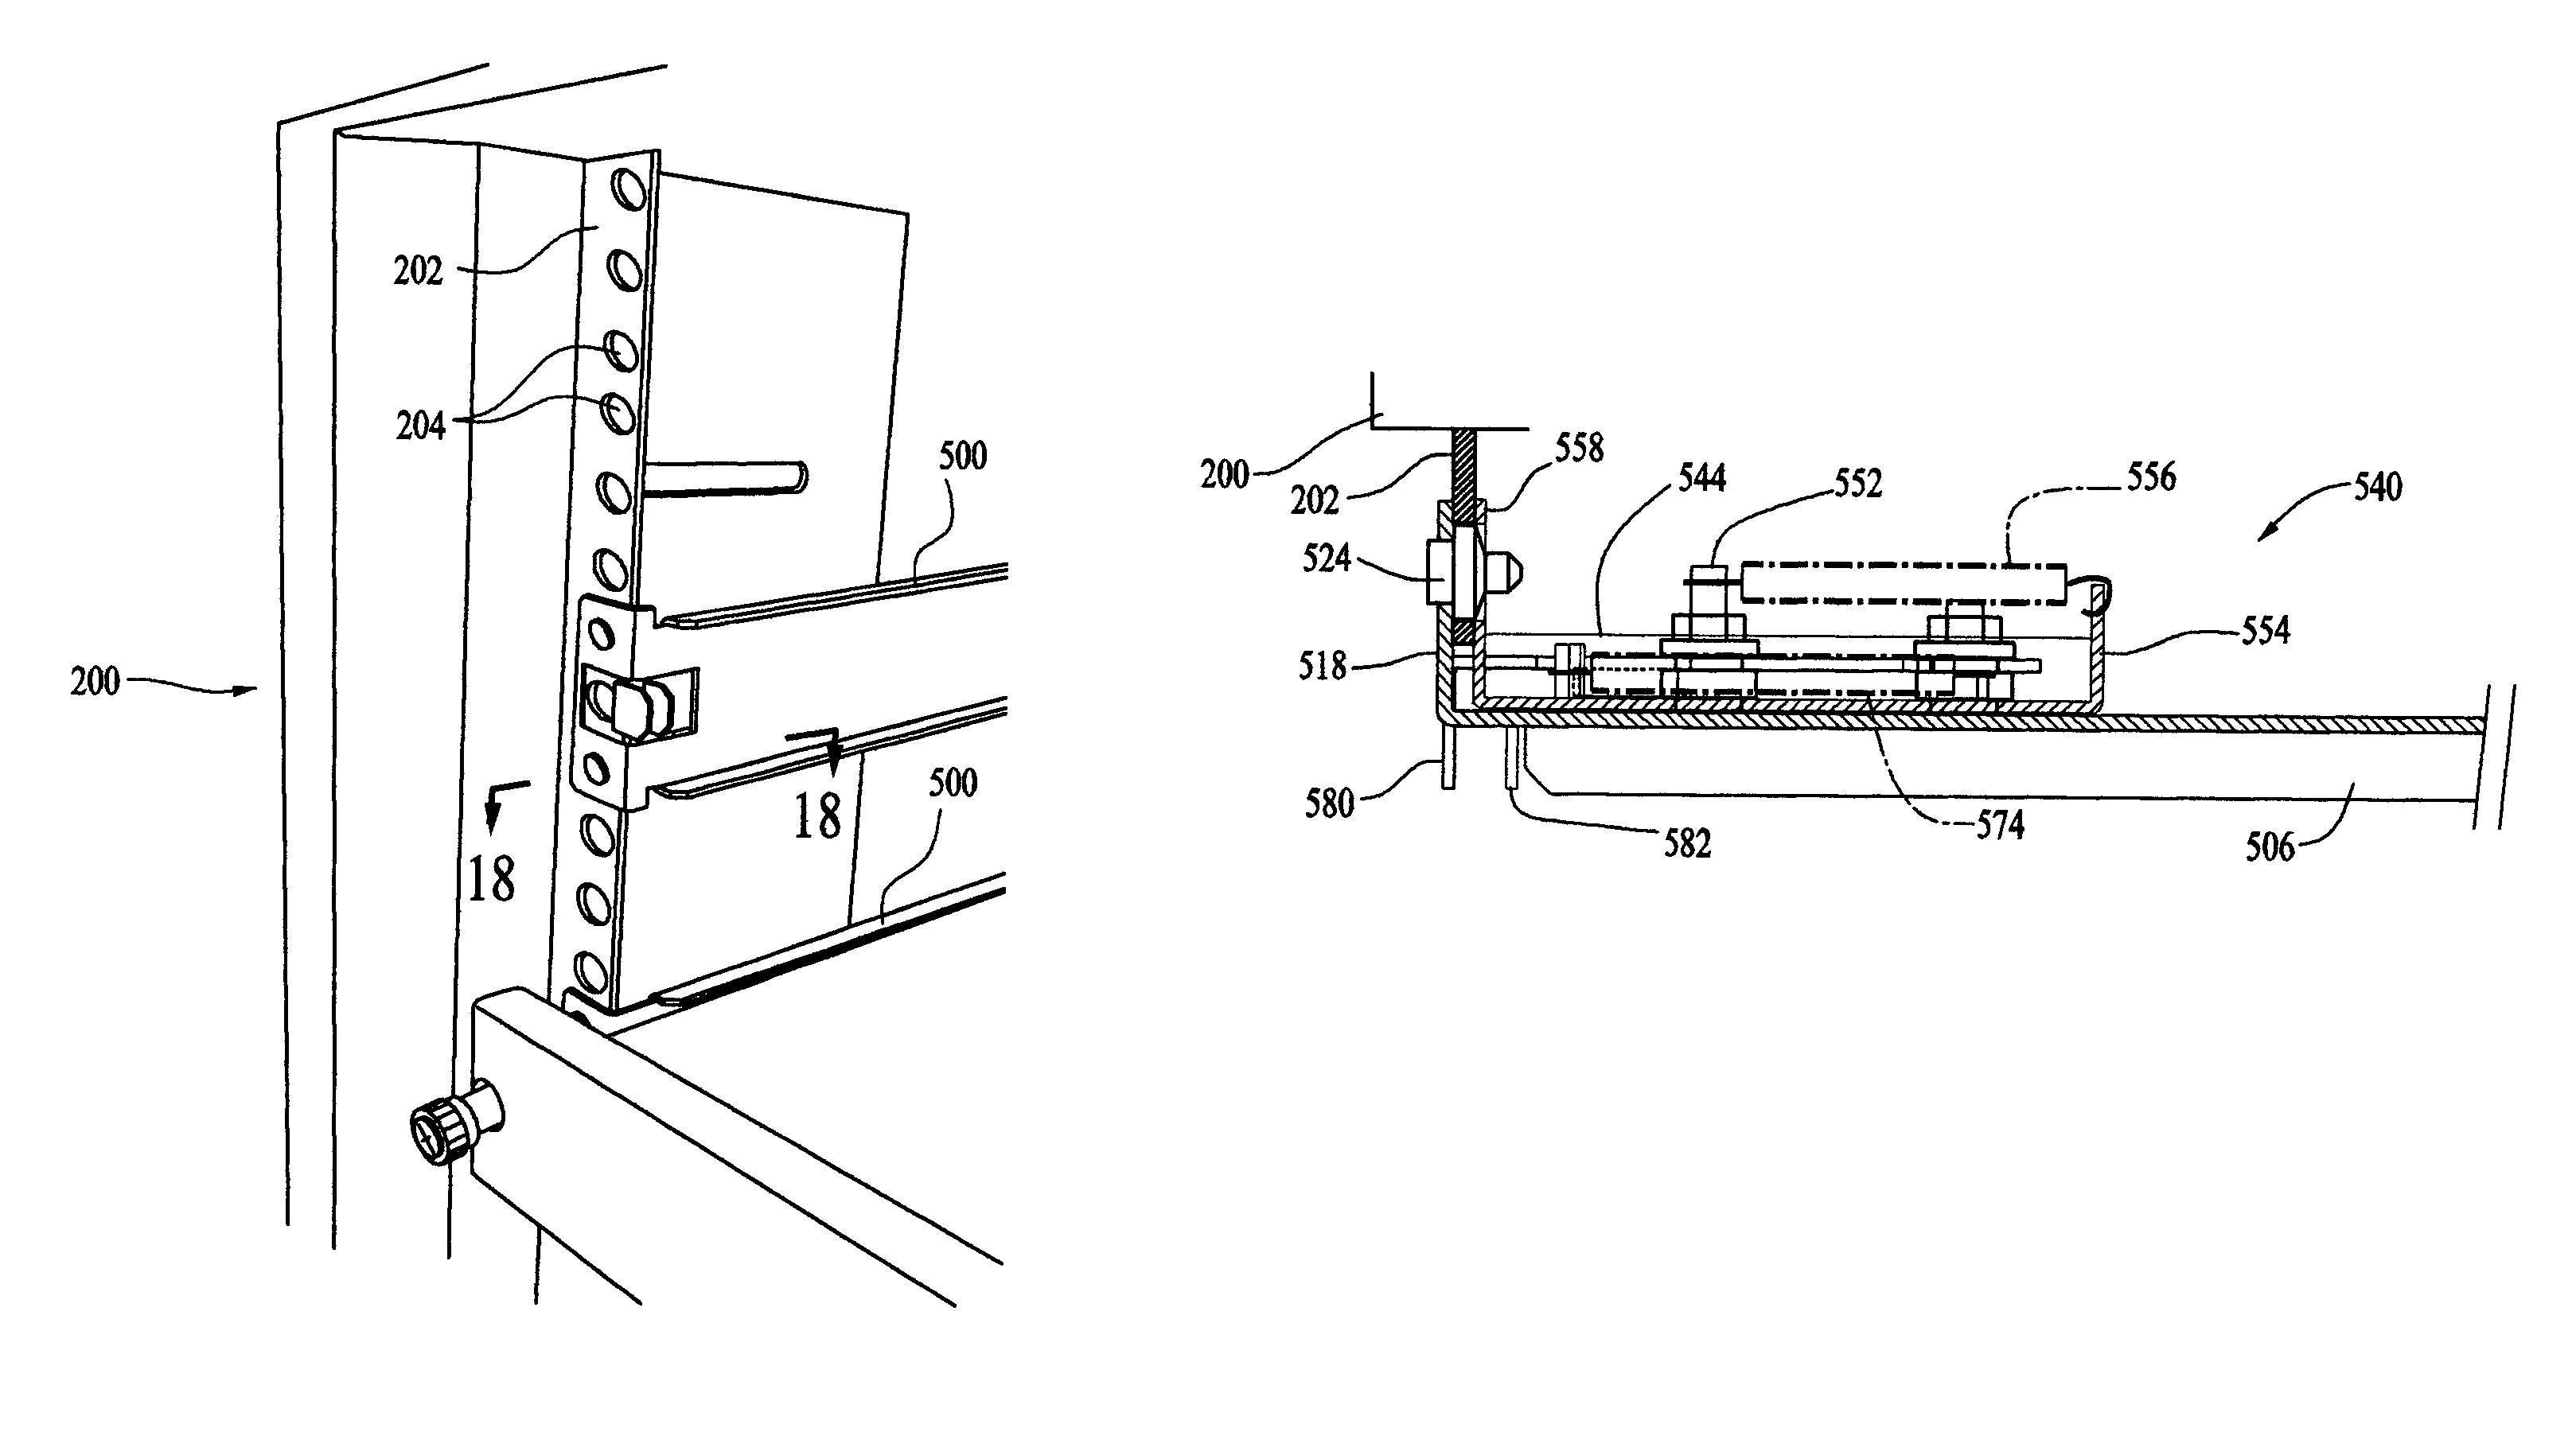 Spring loaded bracket assembly having a tool-less attachment and removal feature